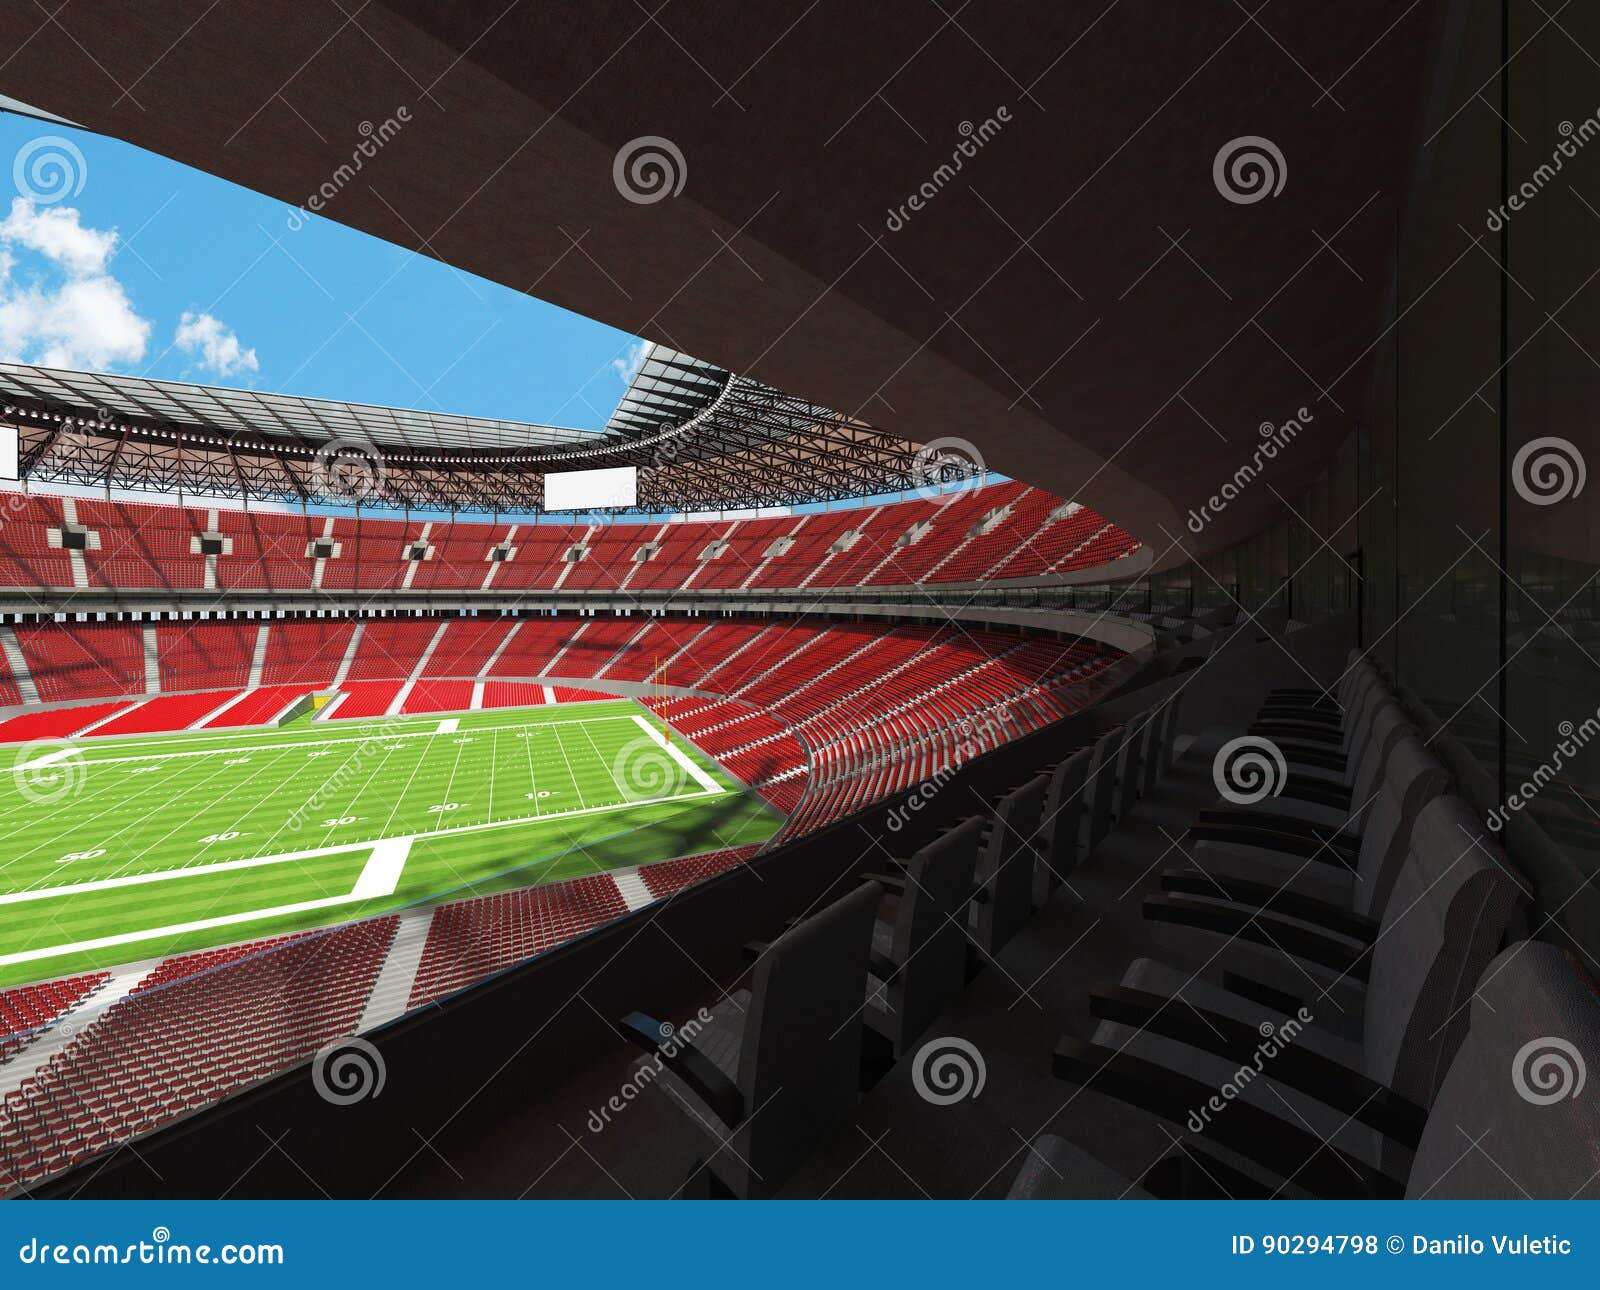 3D Render of a Round American Football Stadium with Read Seats Stock Illustration